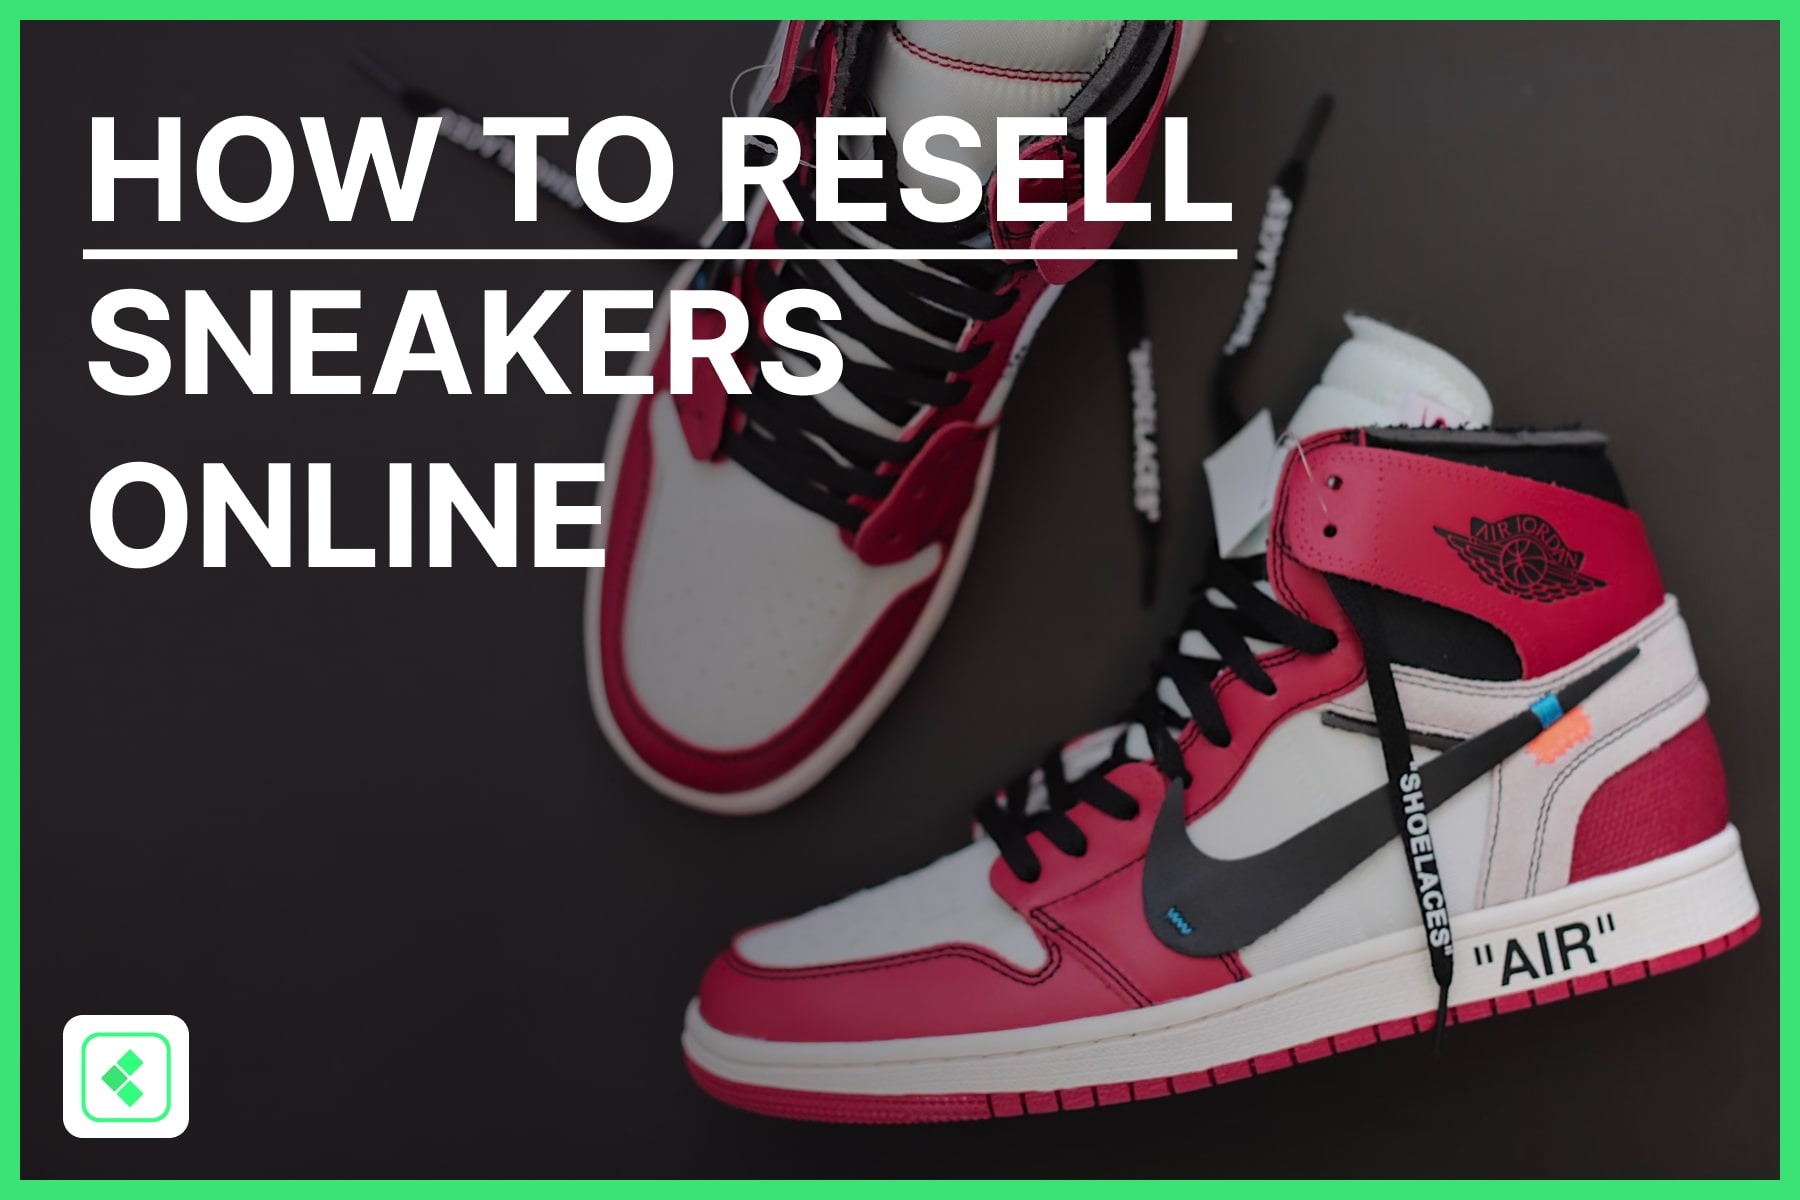 How to resell sneakers online